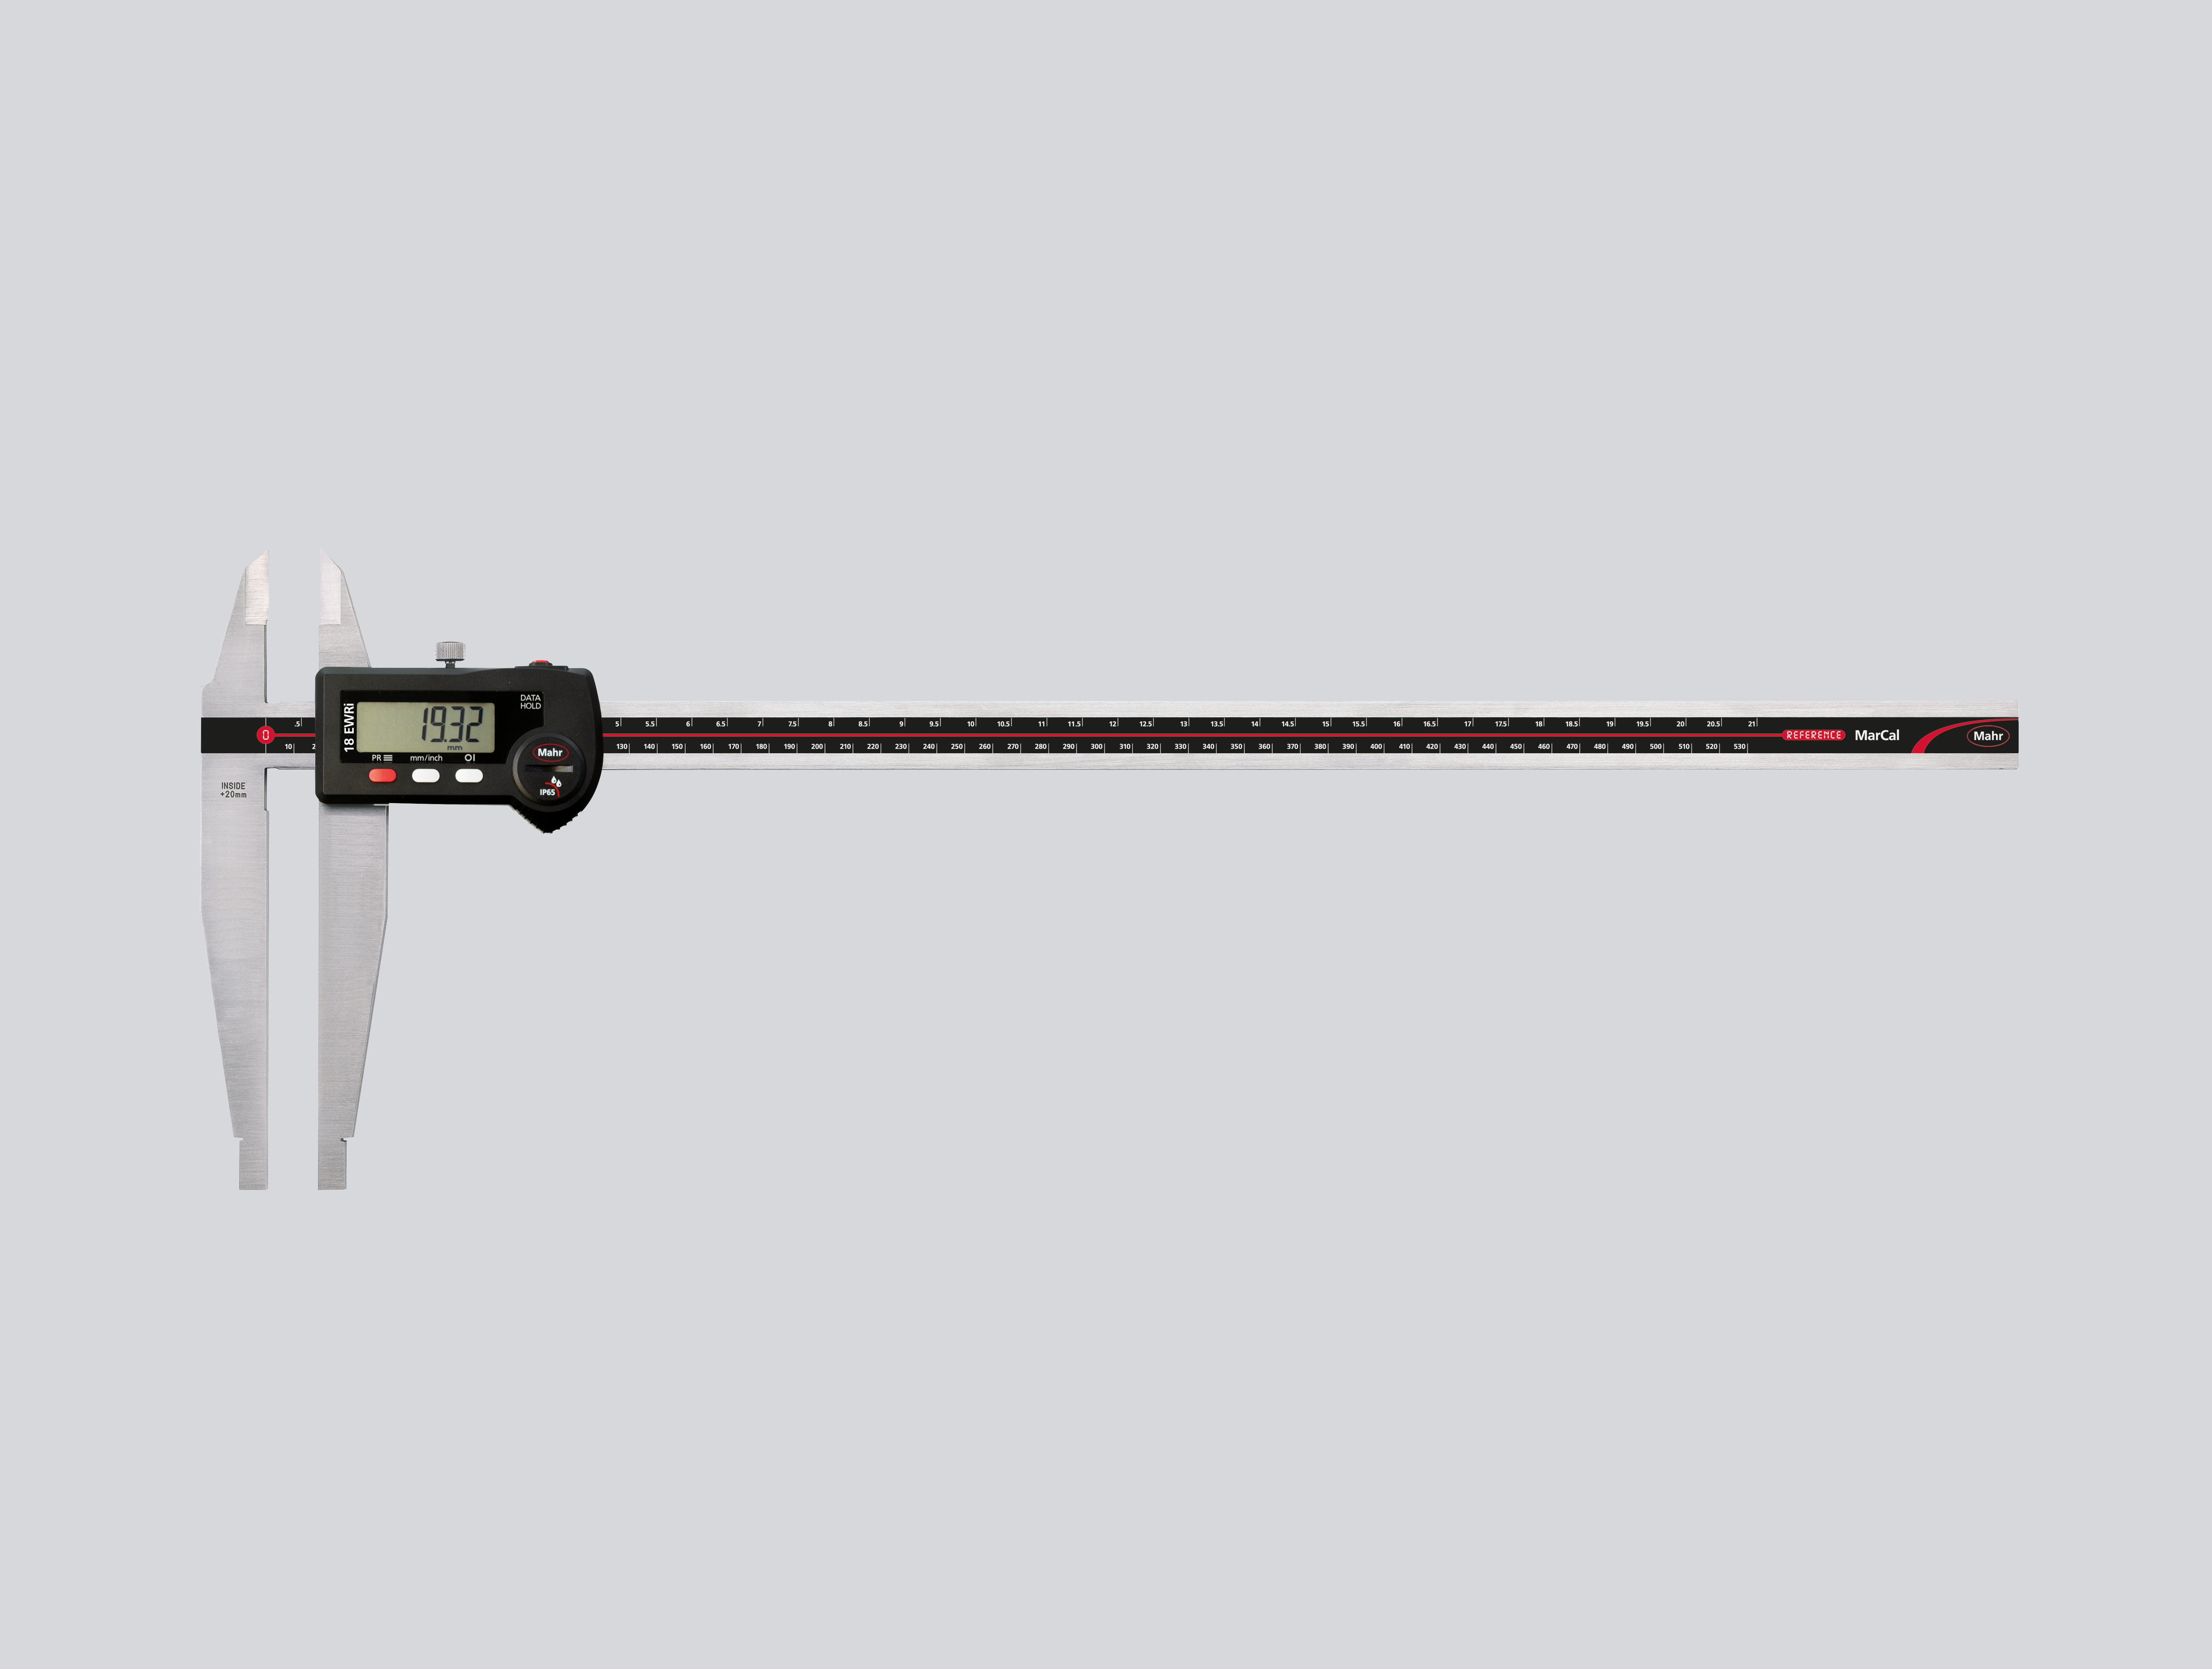 Mahr Inc. Announces New MarCal 18 EWR(i) Digital Caliper with Expanded 800 mm Measuring Range and Integrated Wireless Connectivity